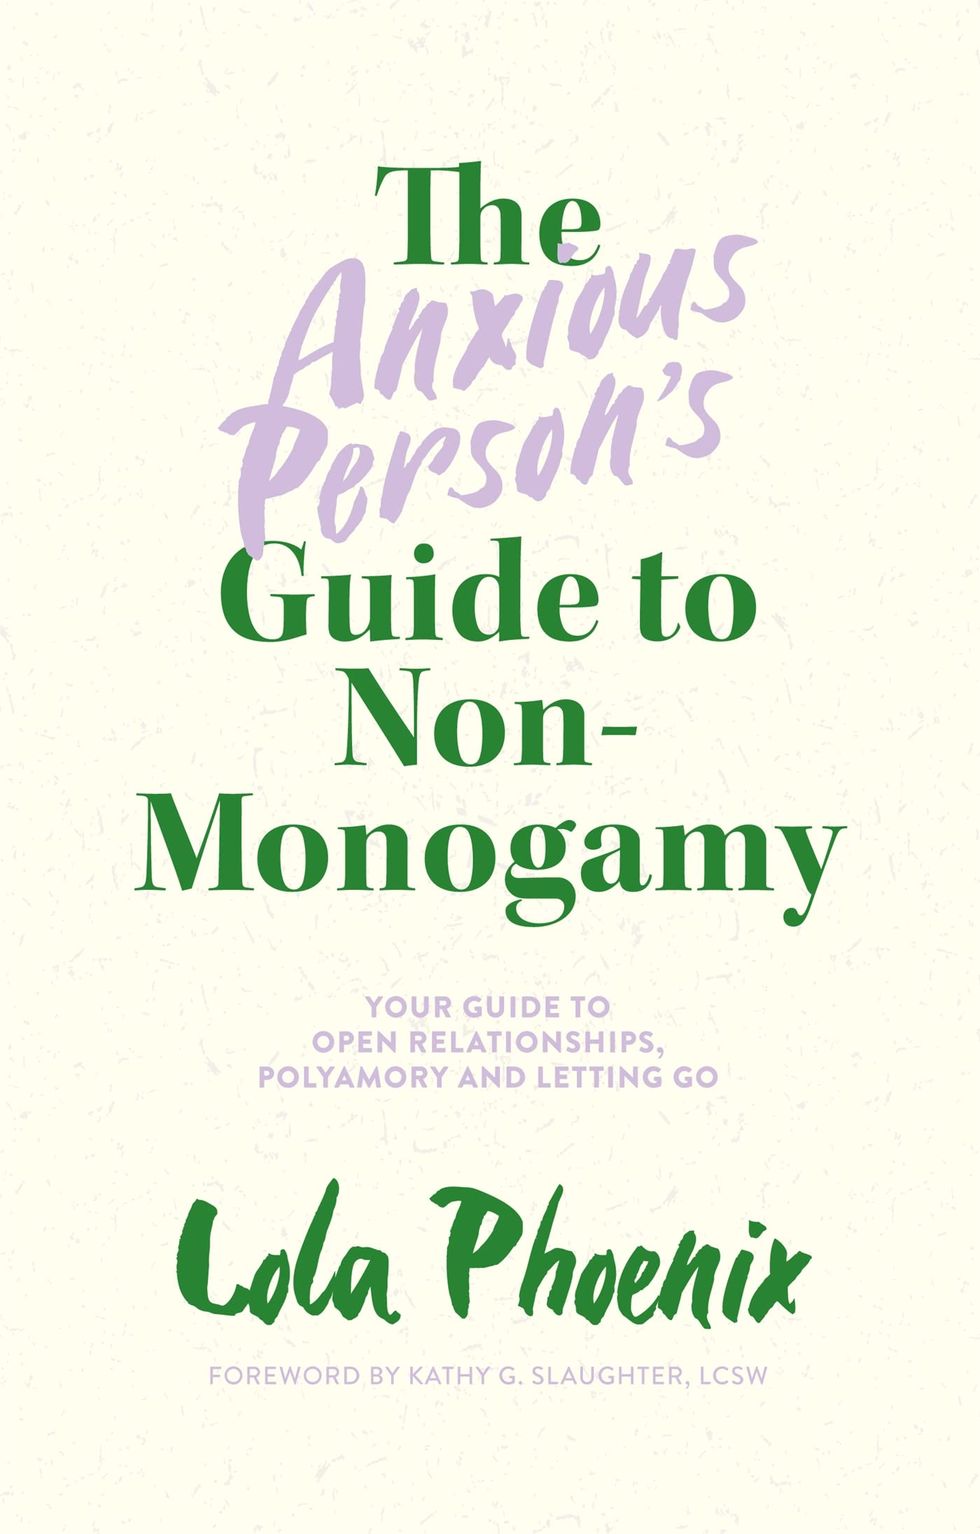 The Anxious Person’s Guide to Non-Monogamy by Lola Phoenix